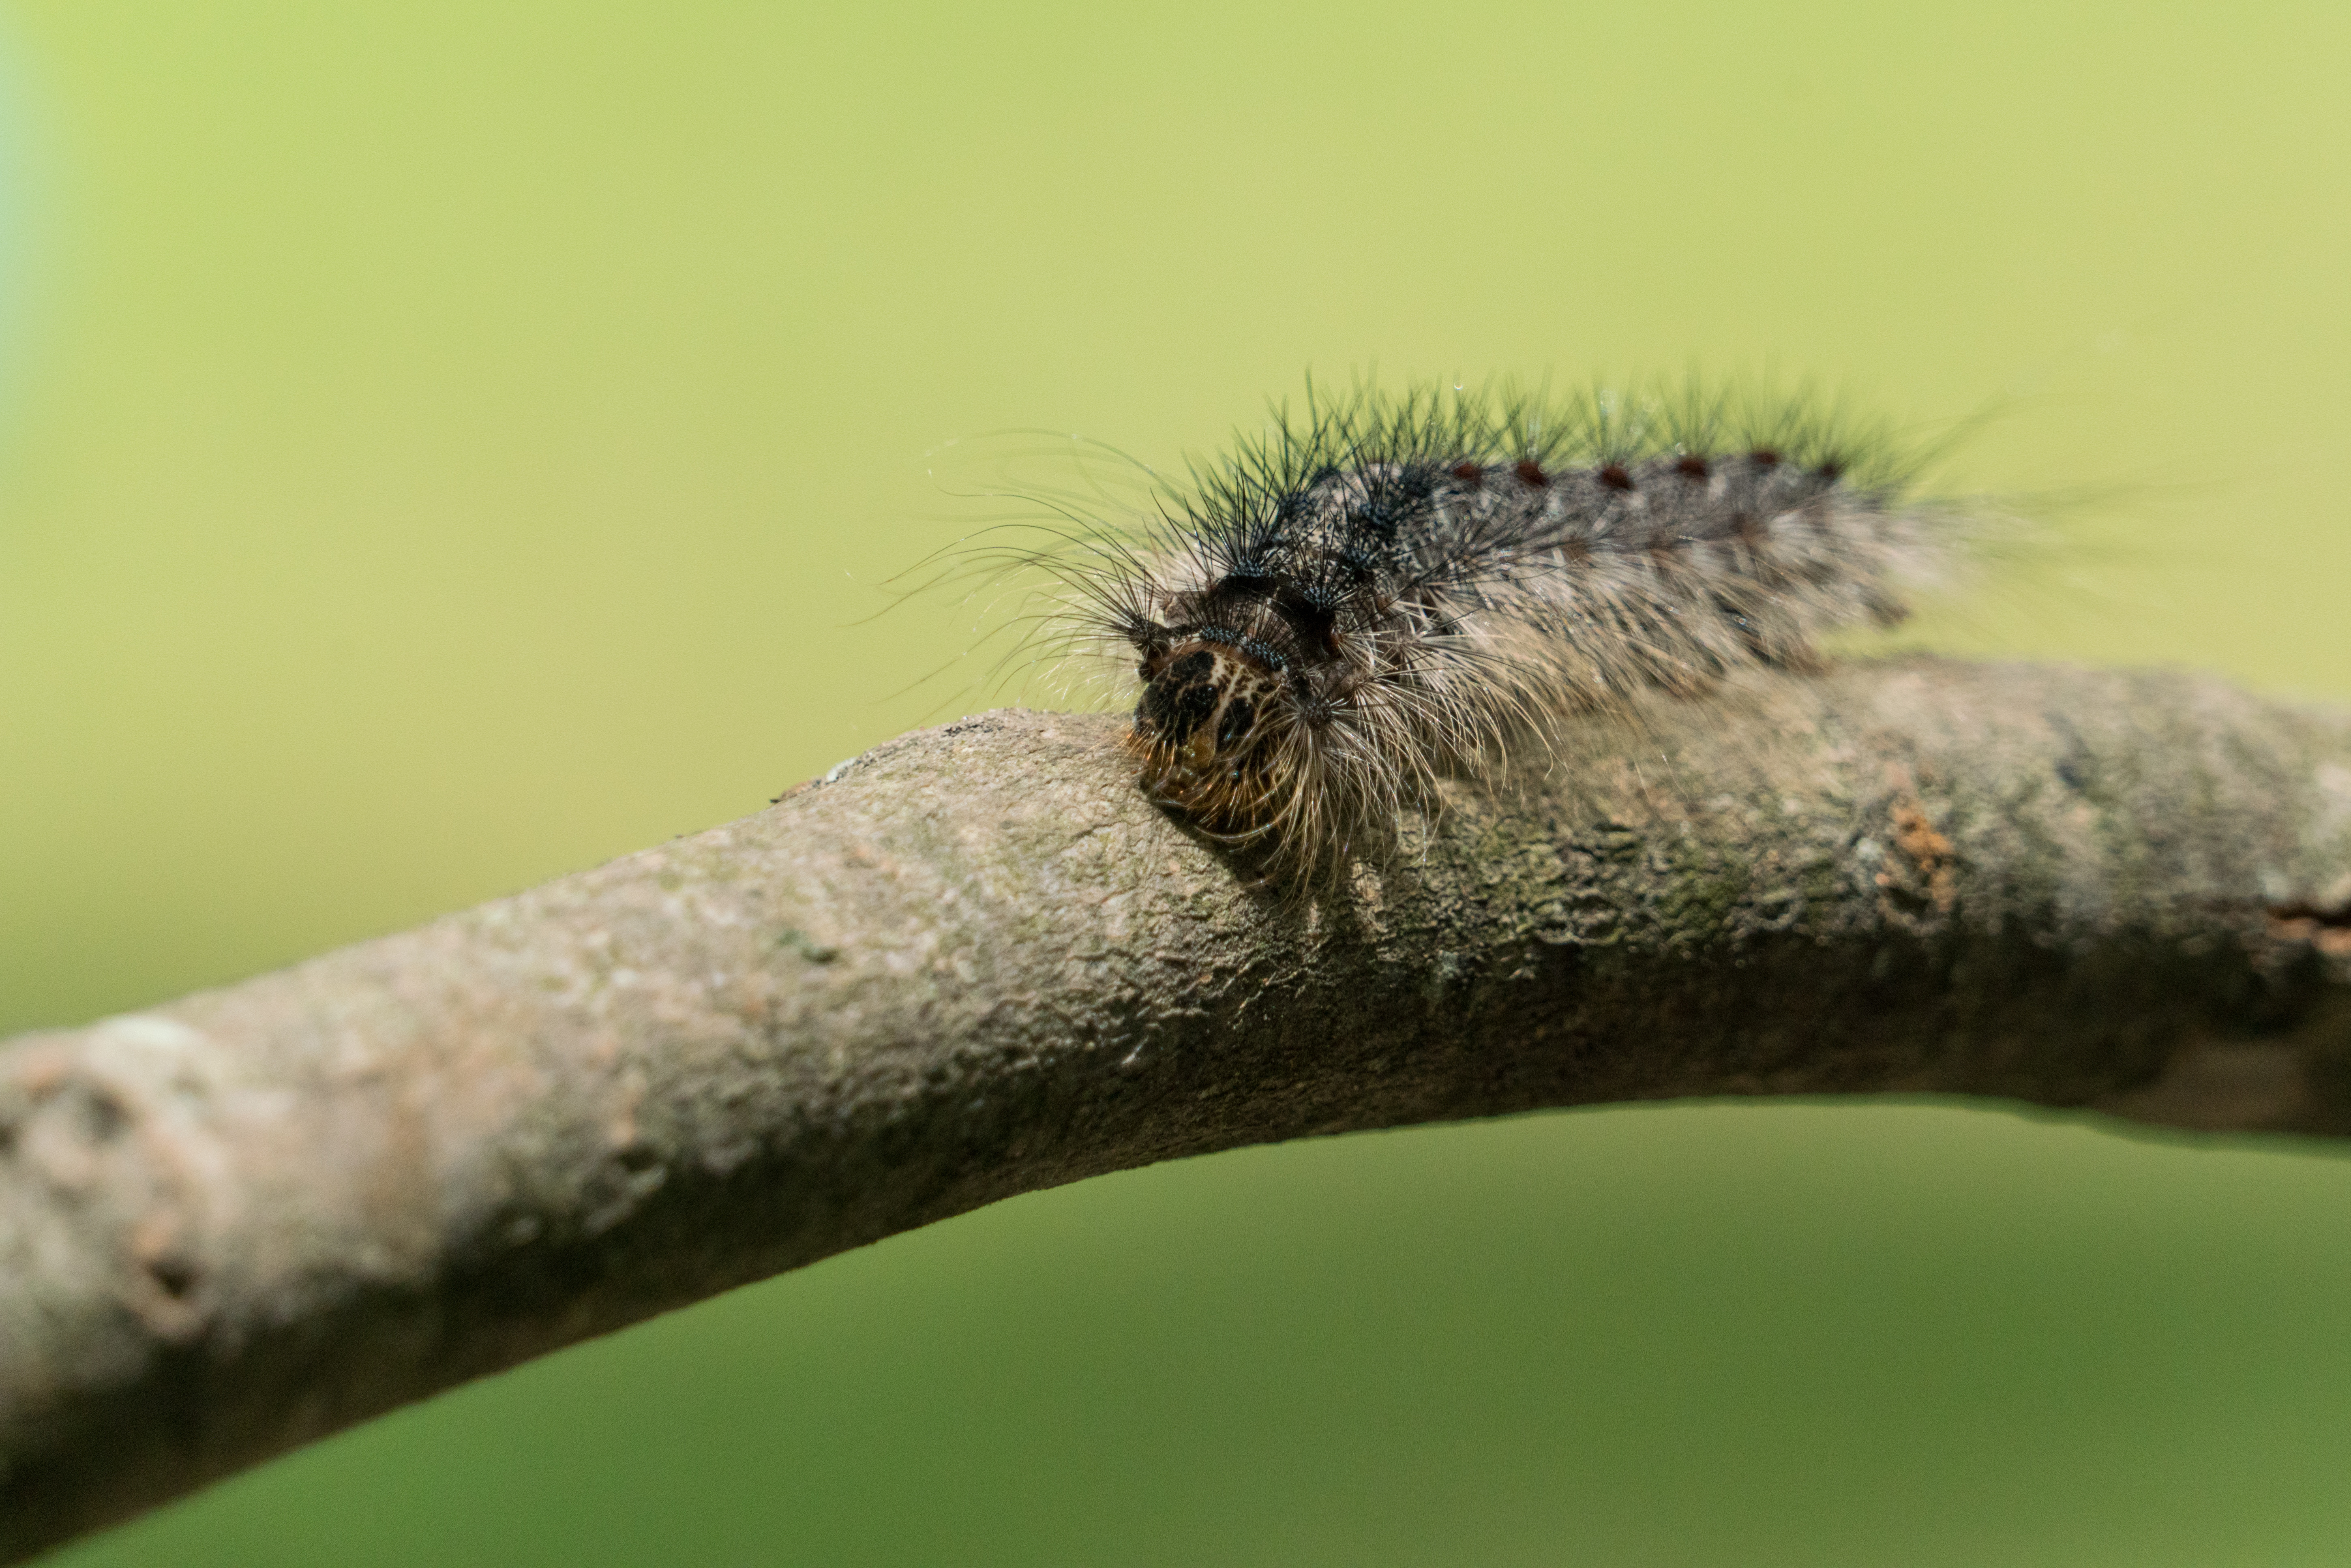 BEYOND LOCAL: Here's how caterpillars eat five times their weight everyday  - Barrie News